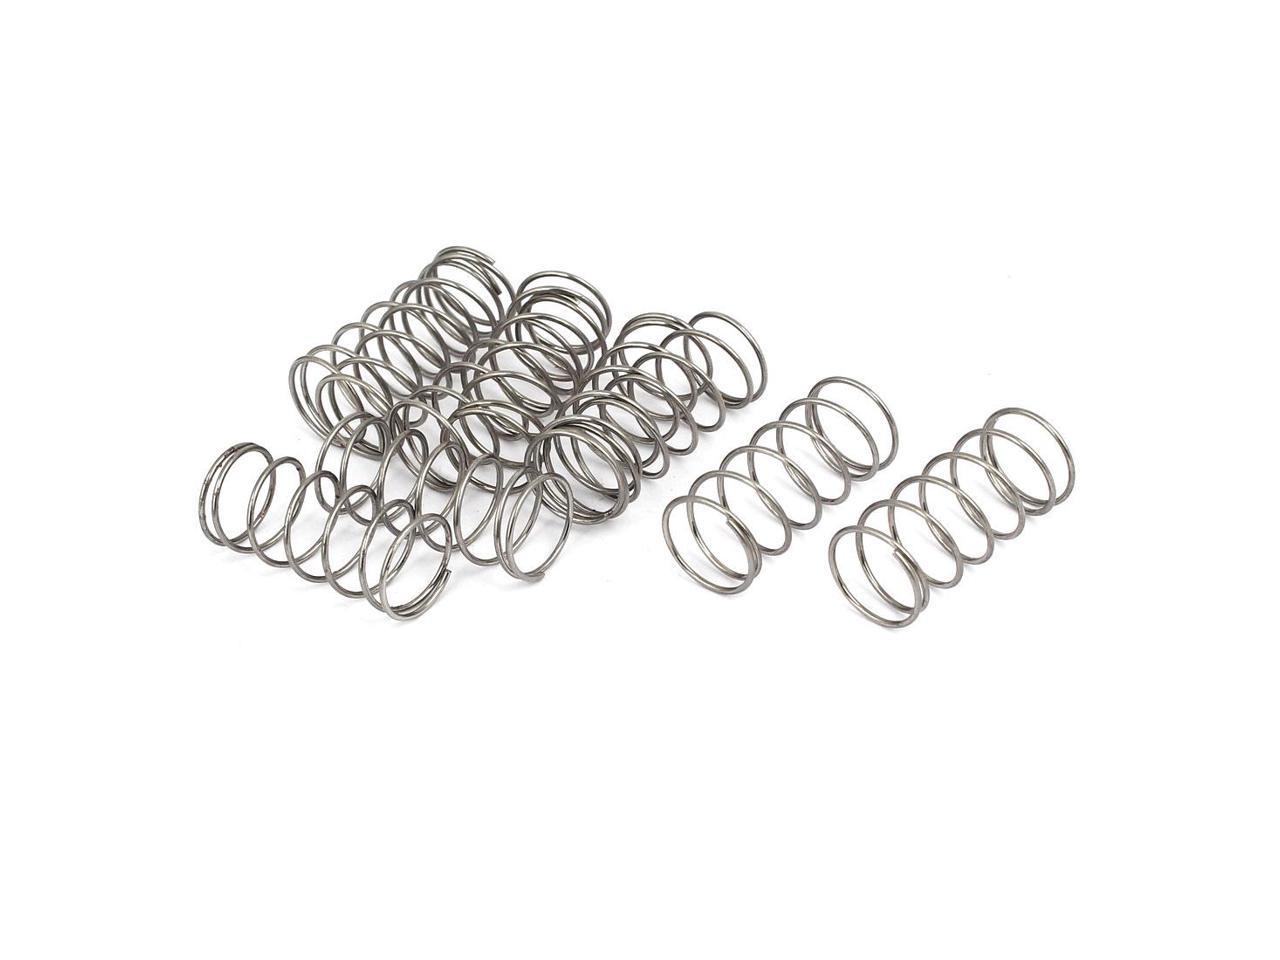 0.7mmx9mmx25mm 304 Stainless Steel Compression Springs Silver Tone 10pcs 